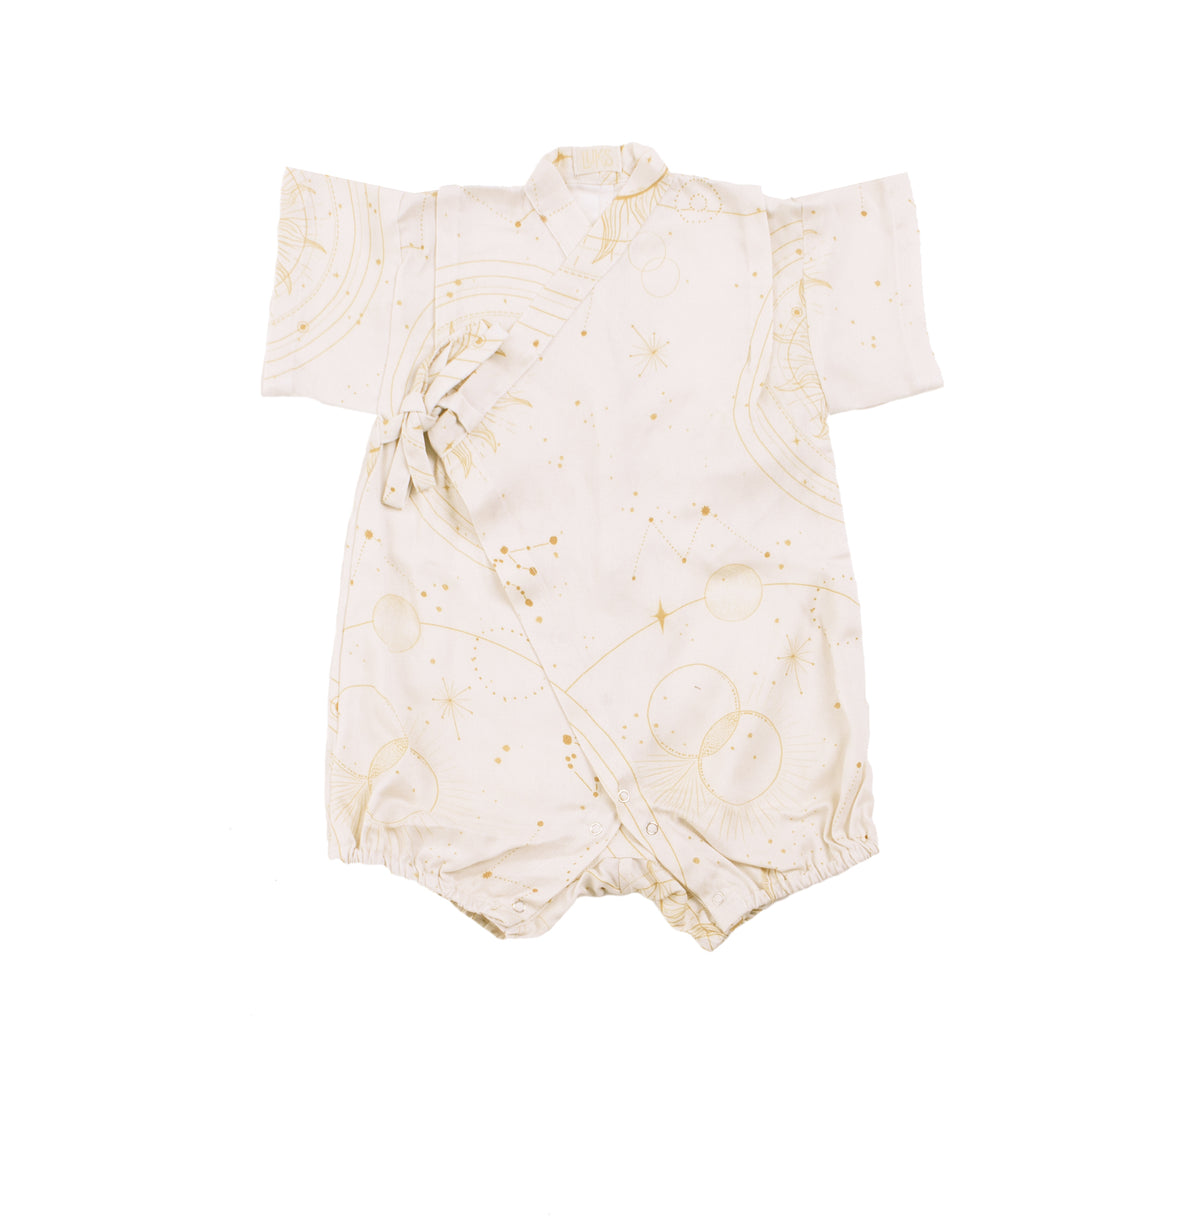 In Stock Embrace The Mystery Light Romper